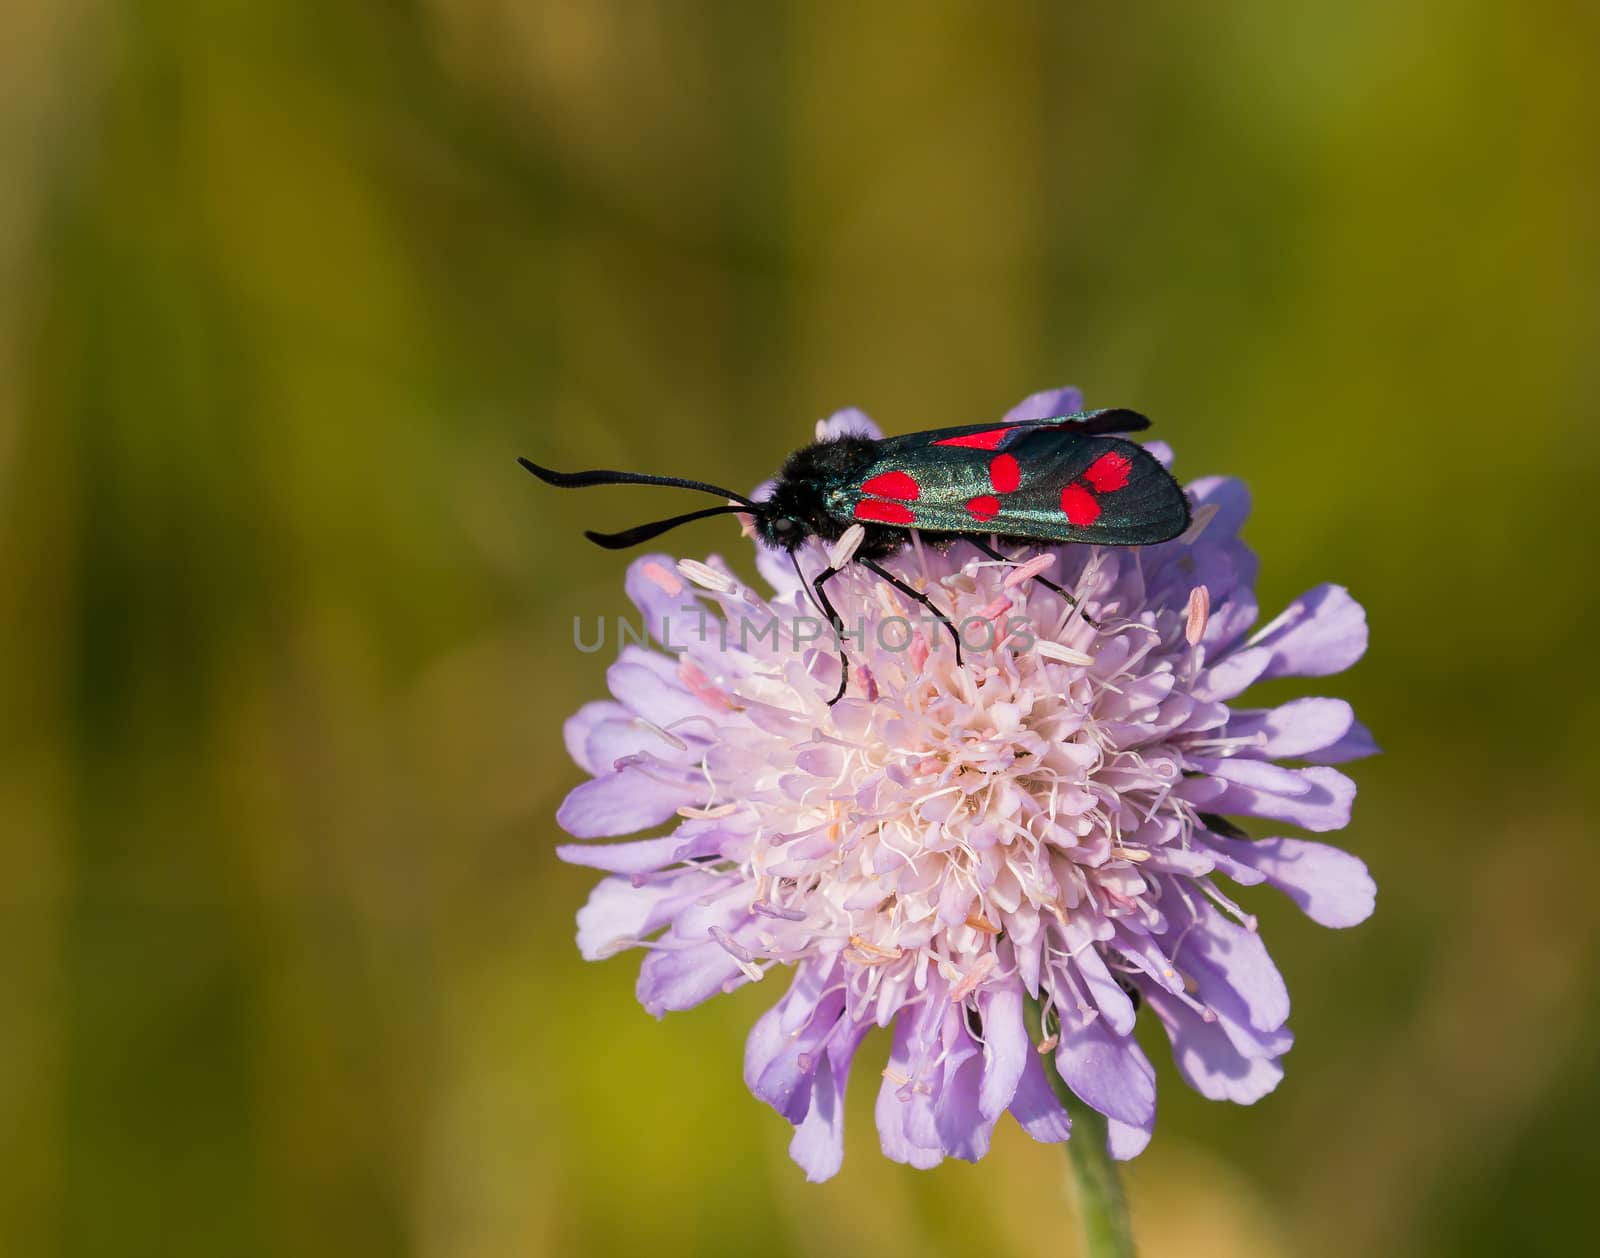 Six-spot Burnet Moth on Field Scabious wild flower during July on South Downs, Sussex, England